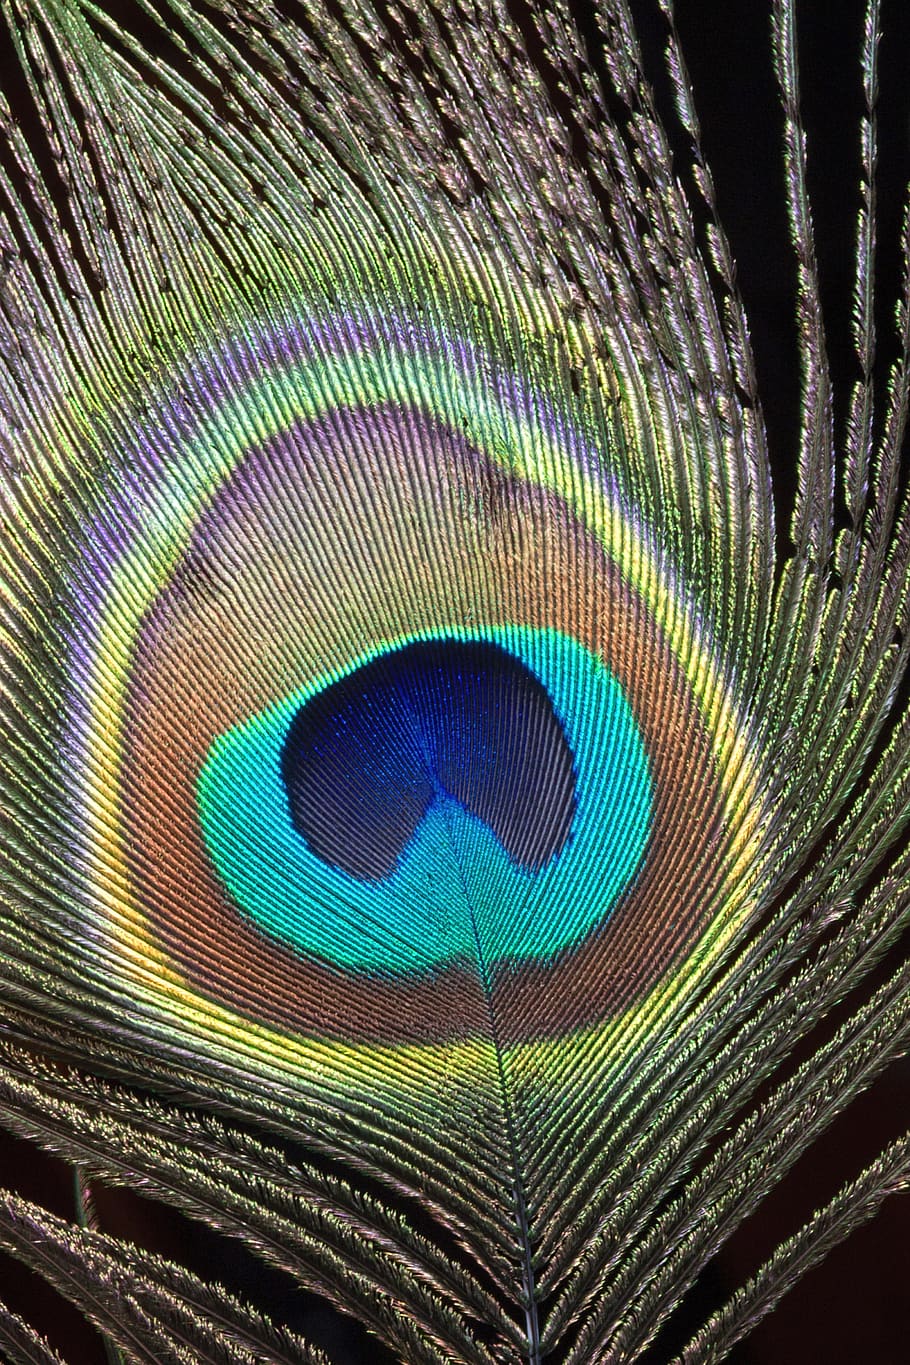 peacock, feather, close-up, macro, bird, colorful, plumage, nature, color, pattern